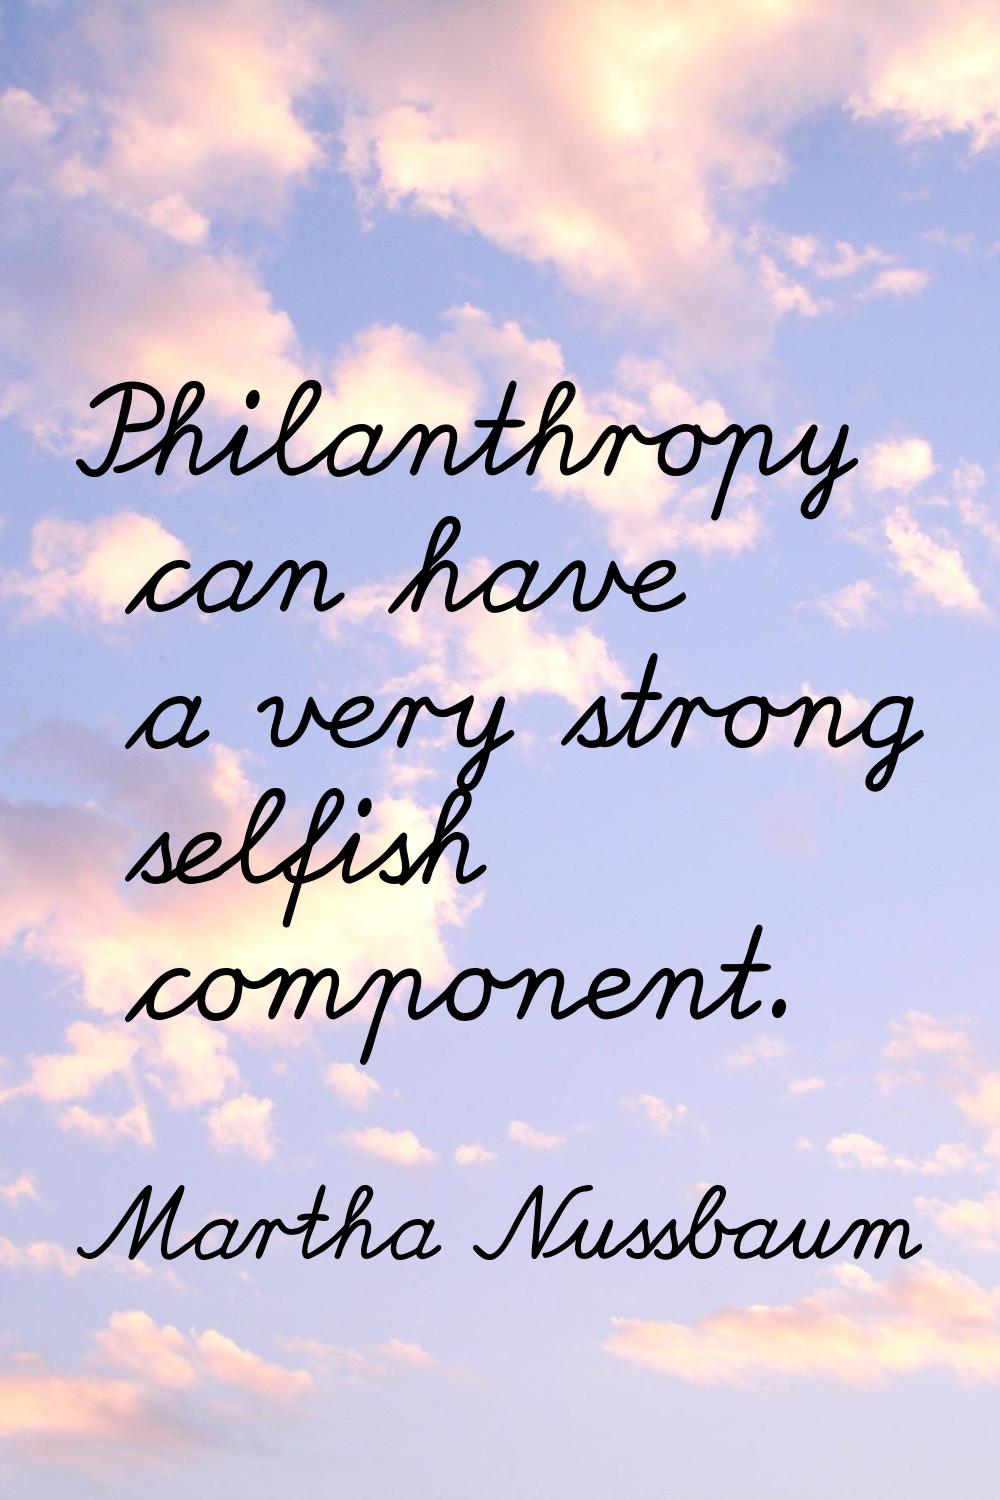 Philanthropy can have a very strong selfish component.